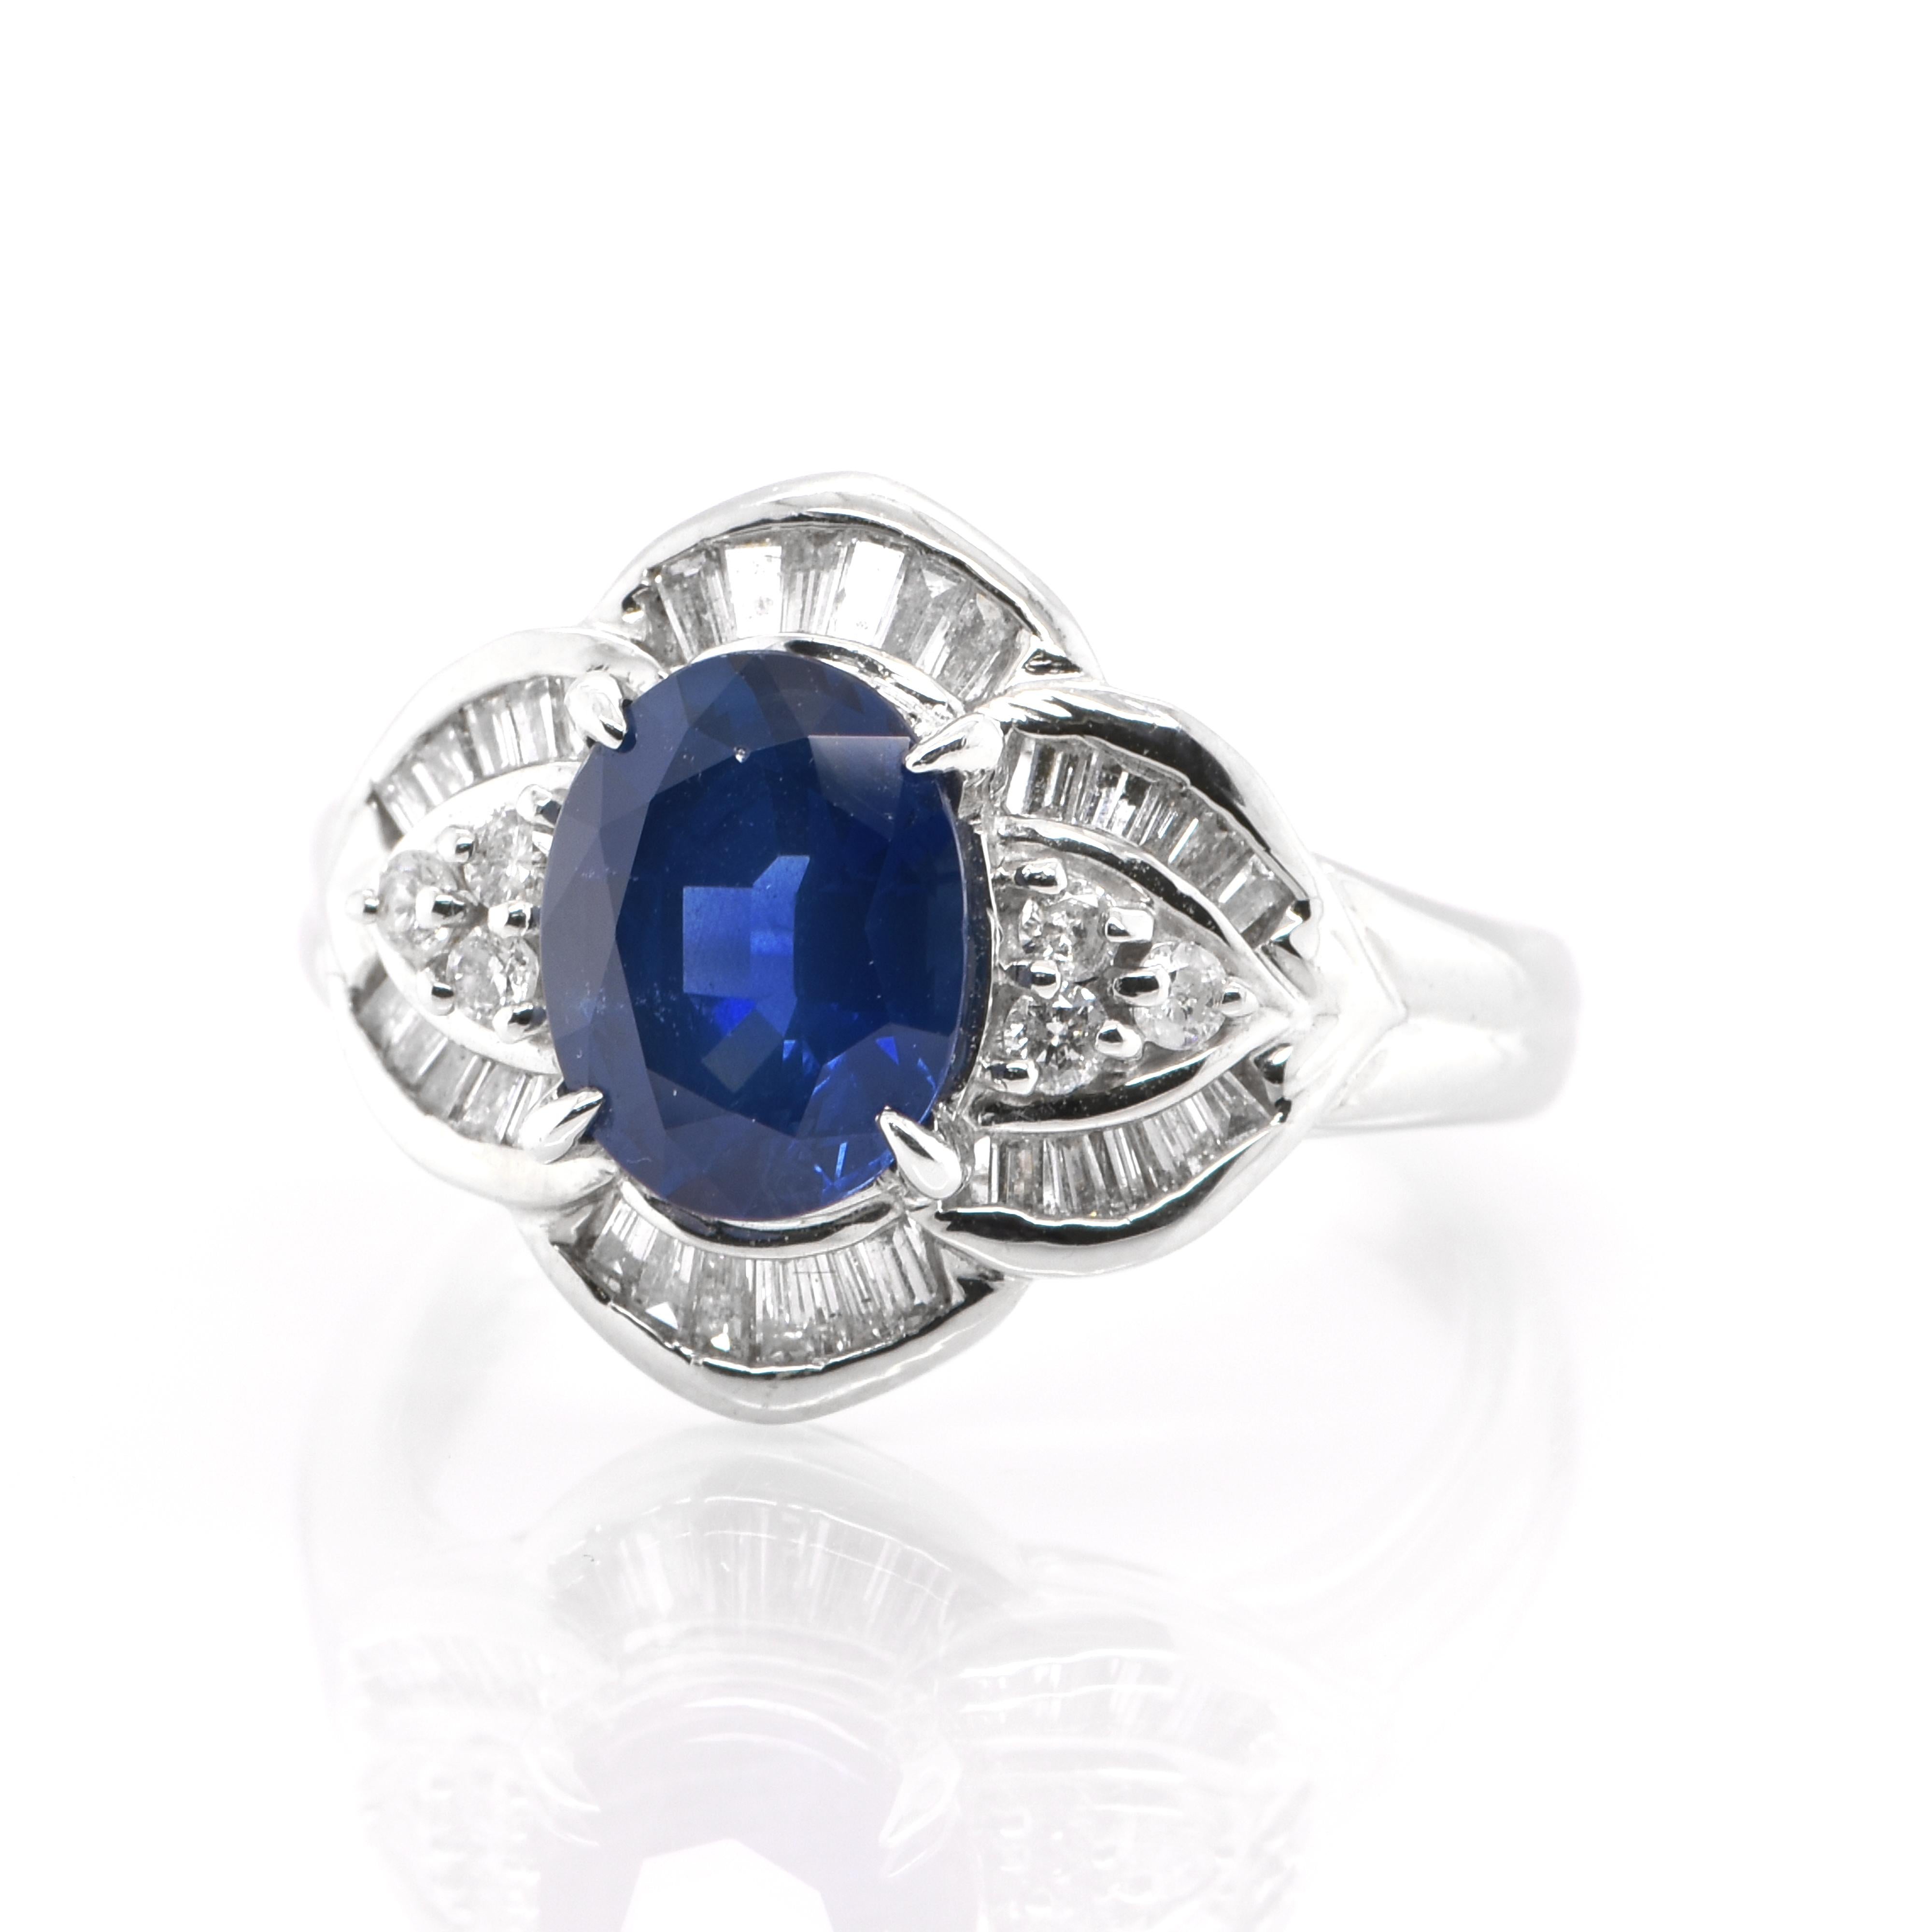 A superb Estate Ring featuring a 2.39 Carat, Natural Sapphire and 0.55 Carats of Diamond Accents set in Platinum. Sapphires have extraordinary durability - they excel in hardness as well as toughness and durability making them very popular in